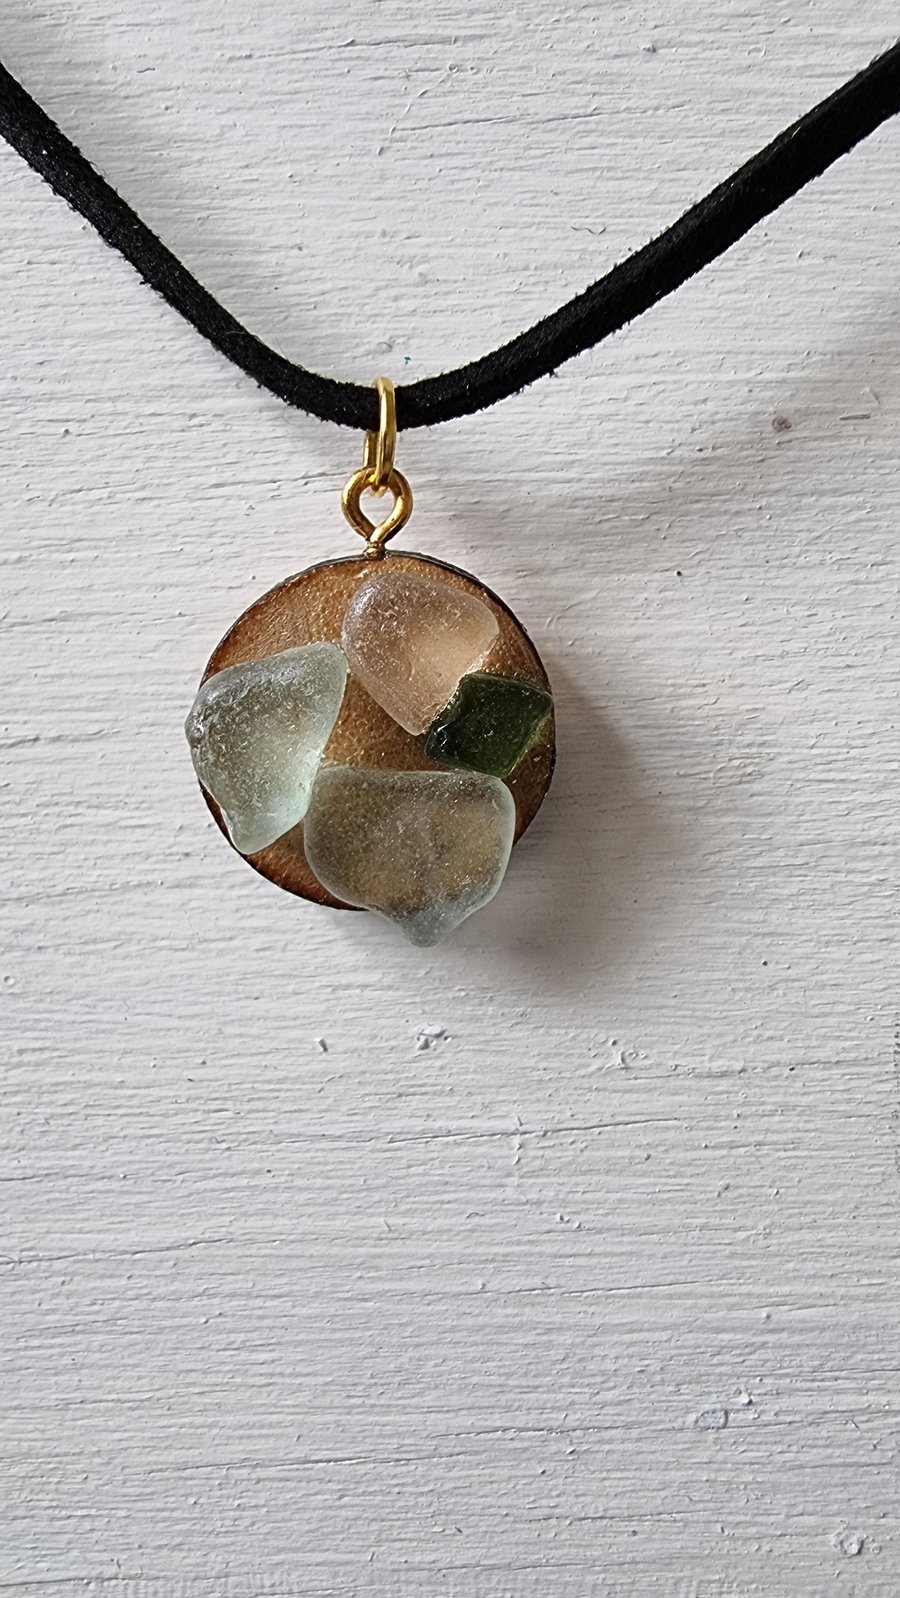 Washed Ashore; 4 piece sea glass and wood pendant